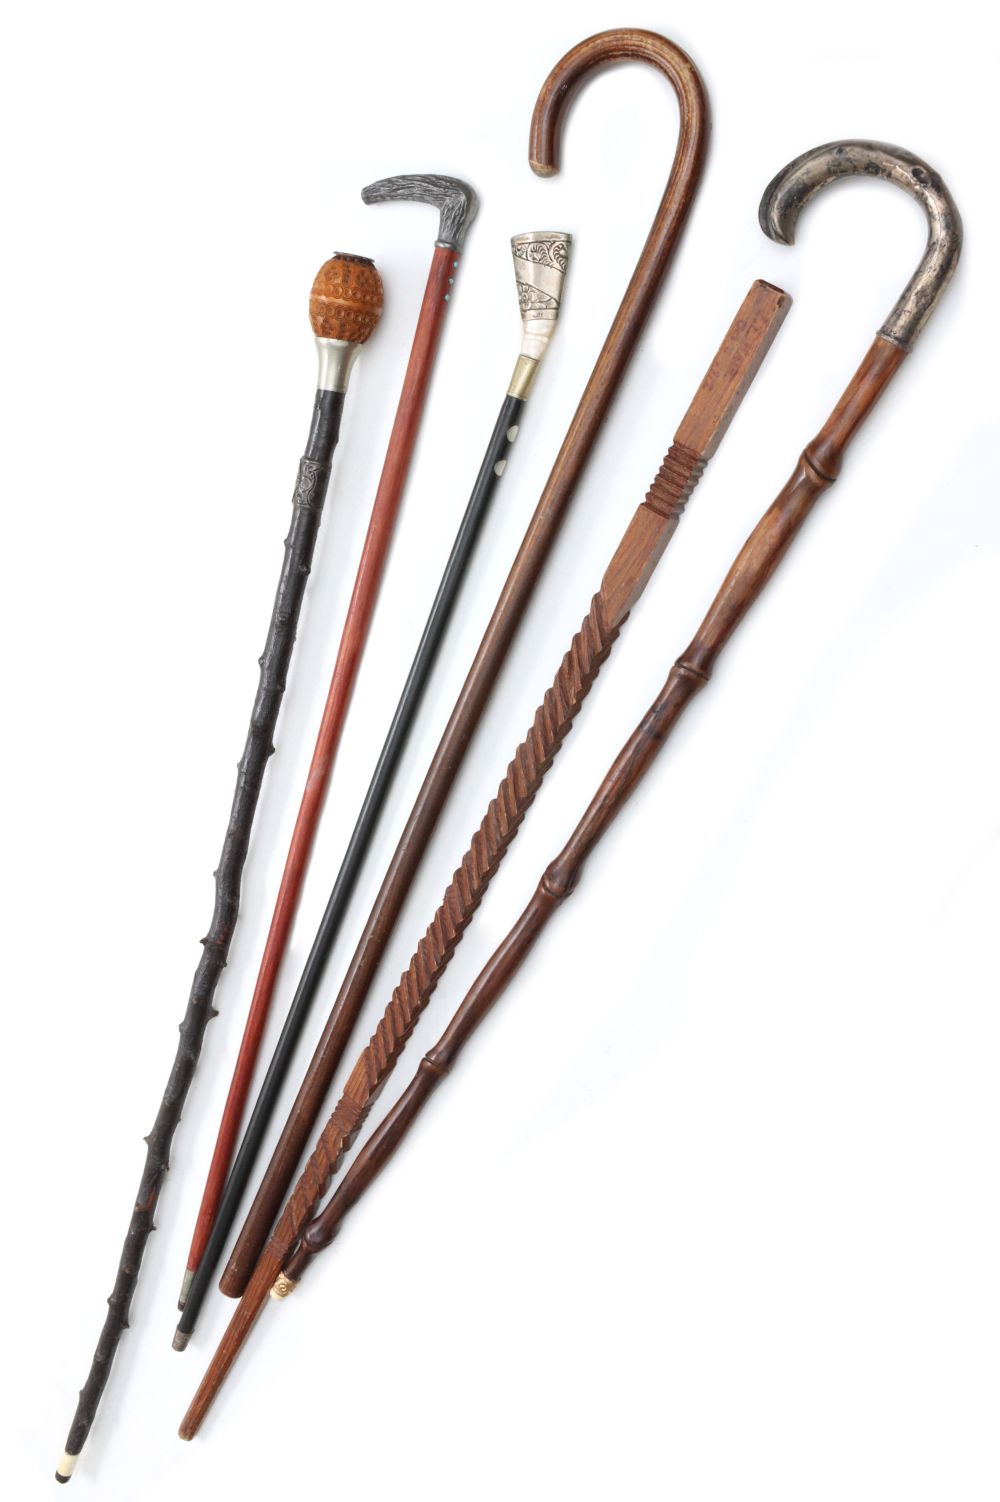 A COLLECTION OF CANES, WALKING STICKS AND SIMILAR ITEMS